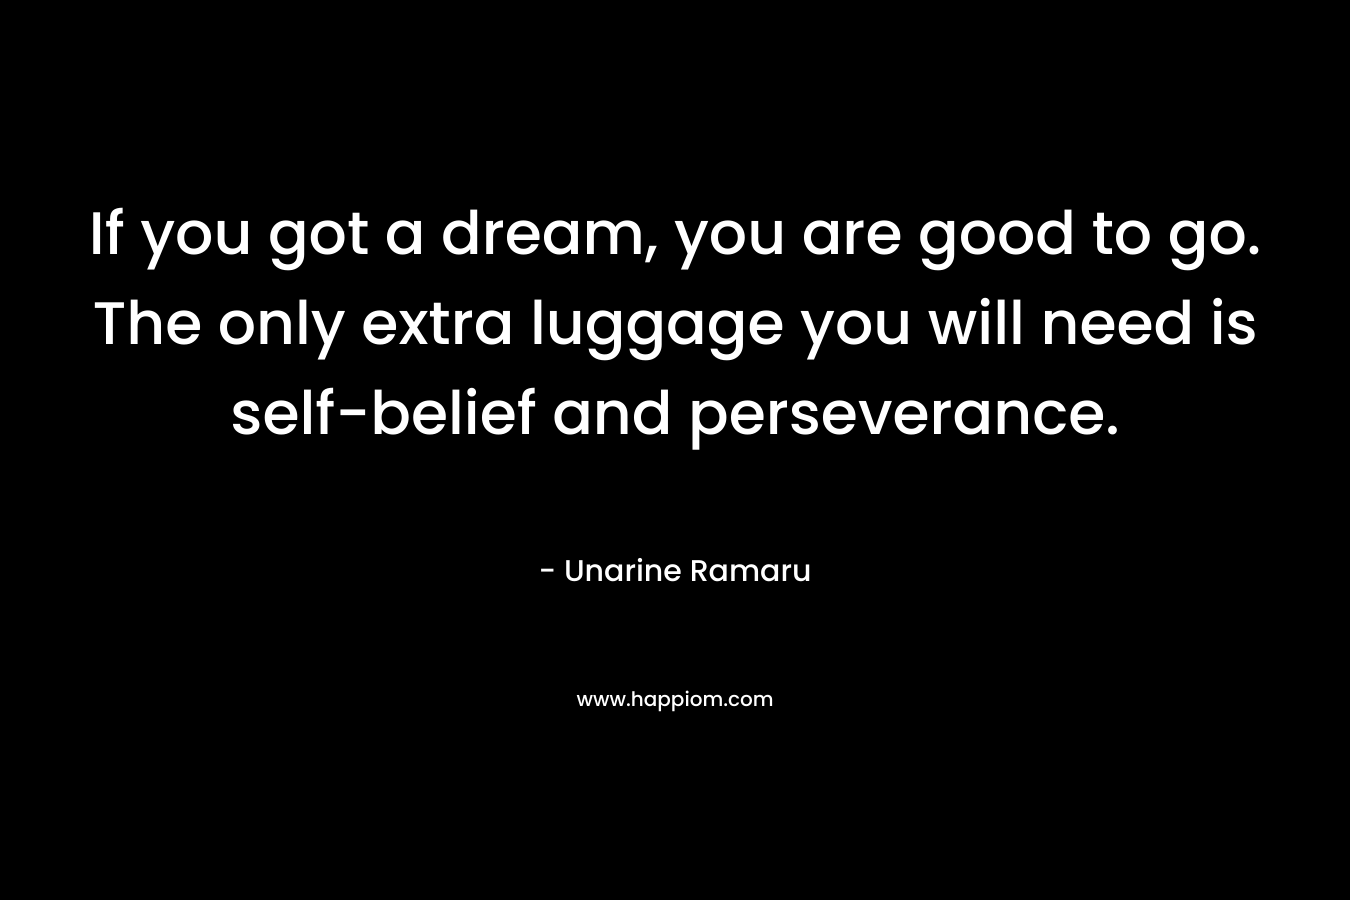 If you got a dream, you are good to go. The only extra luggage you will need is self-belief and perseverance.